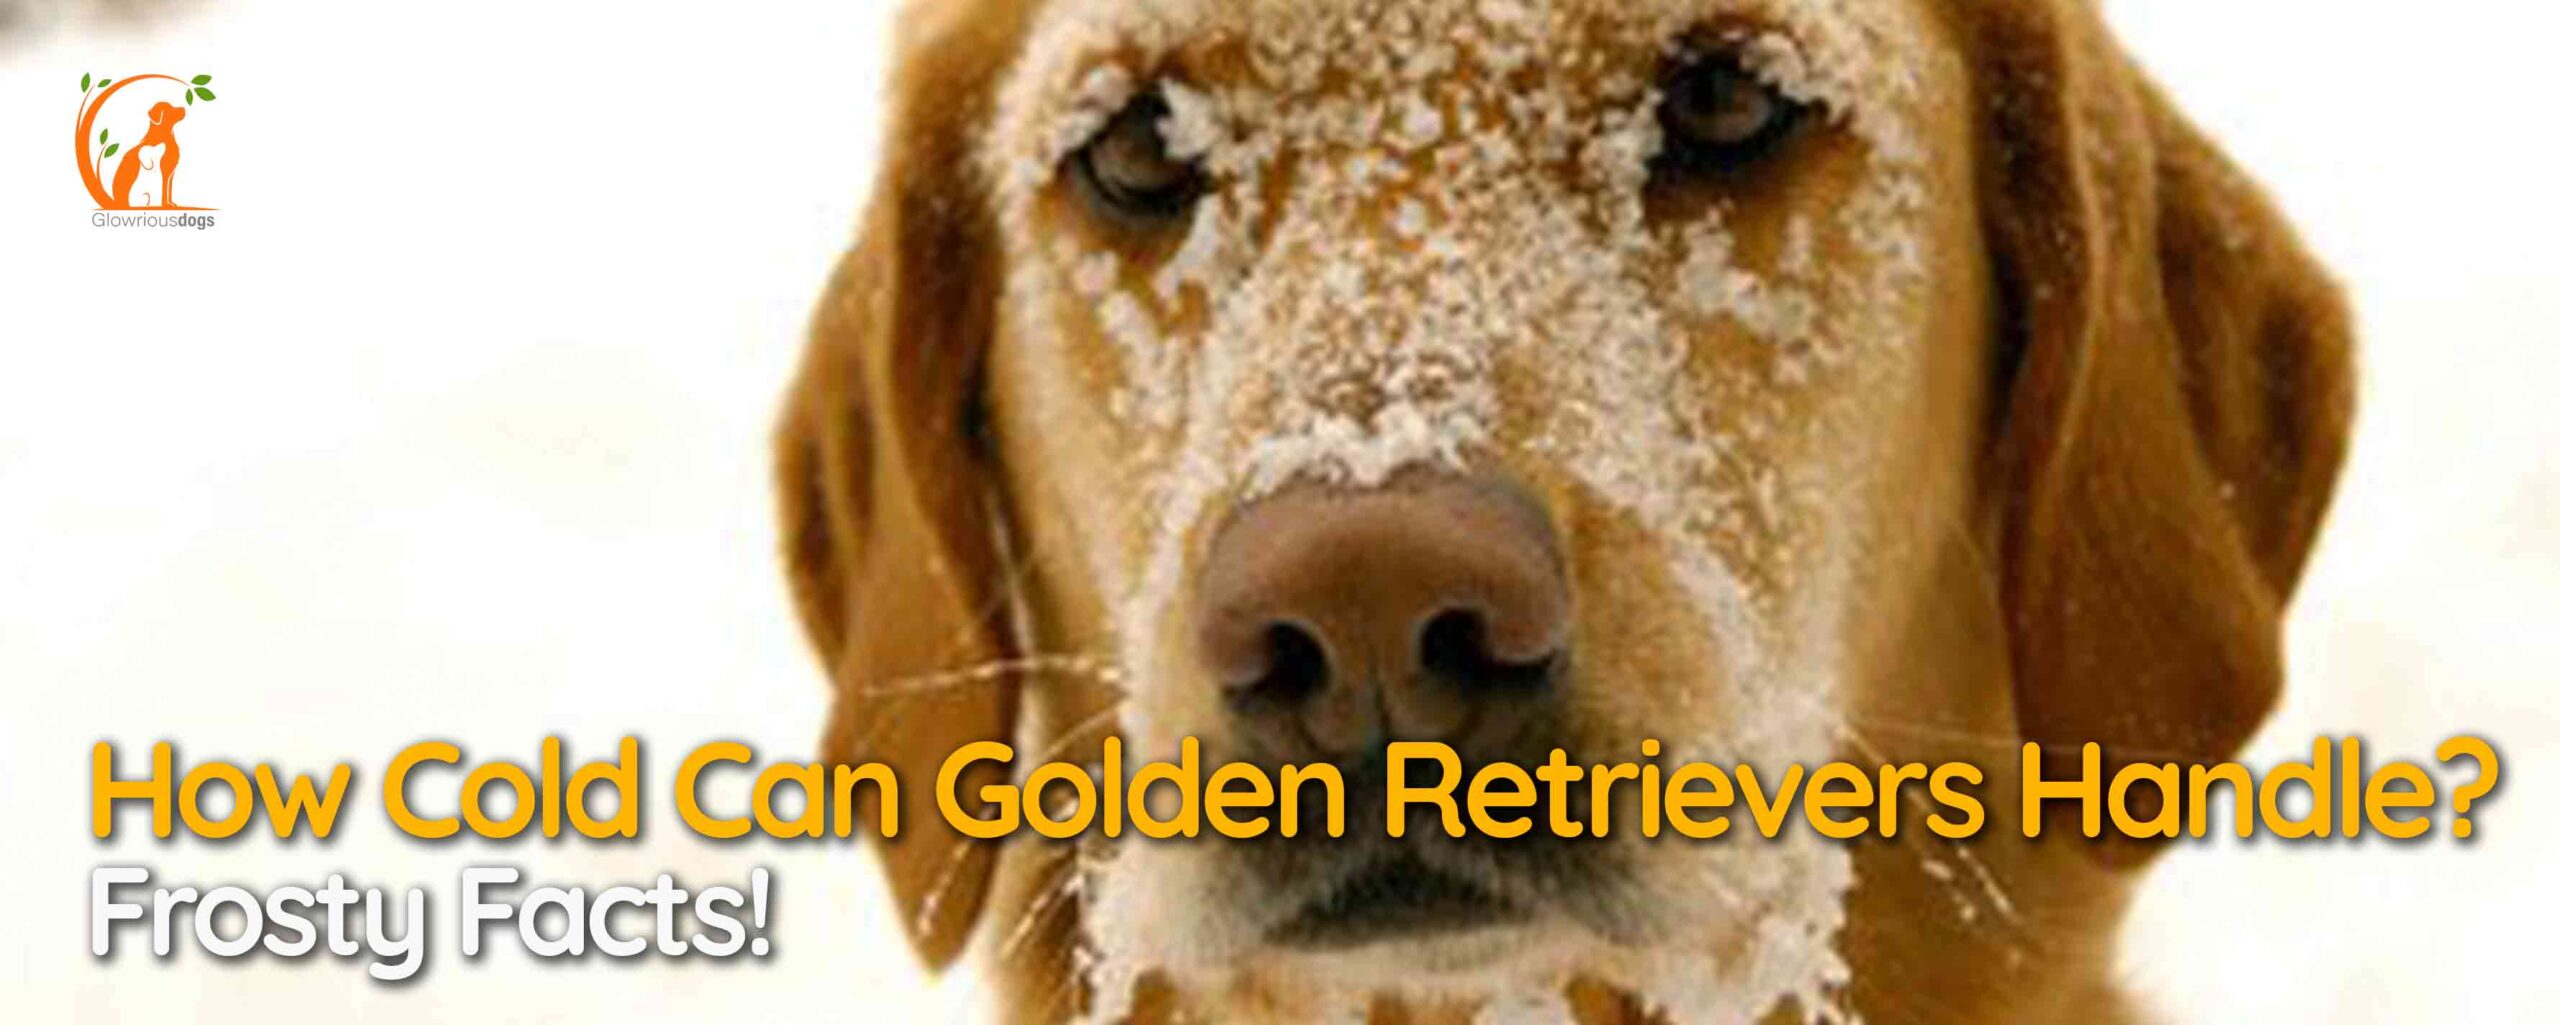 How Cold Can Golden Retrievers Handle? Frosty Facts!